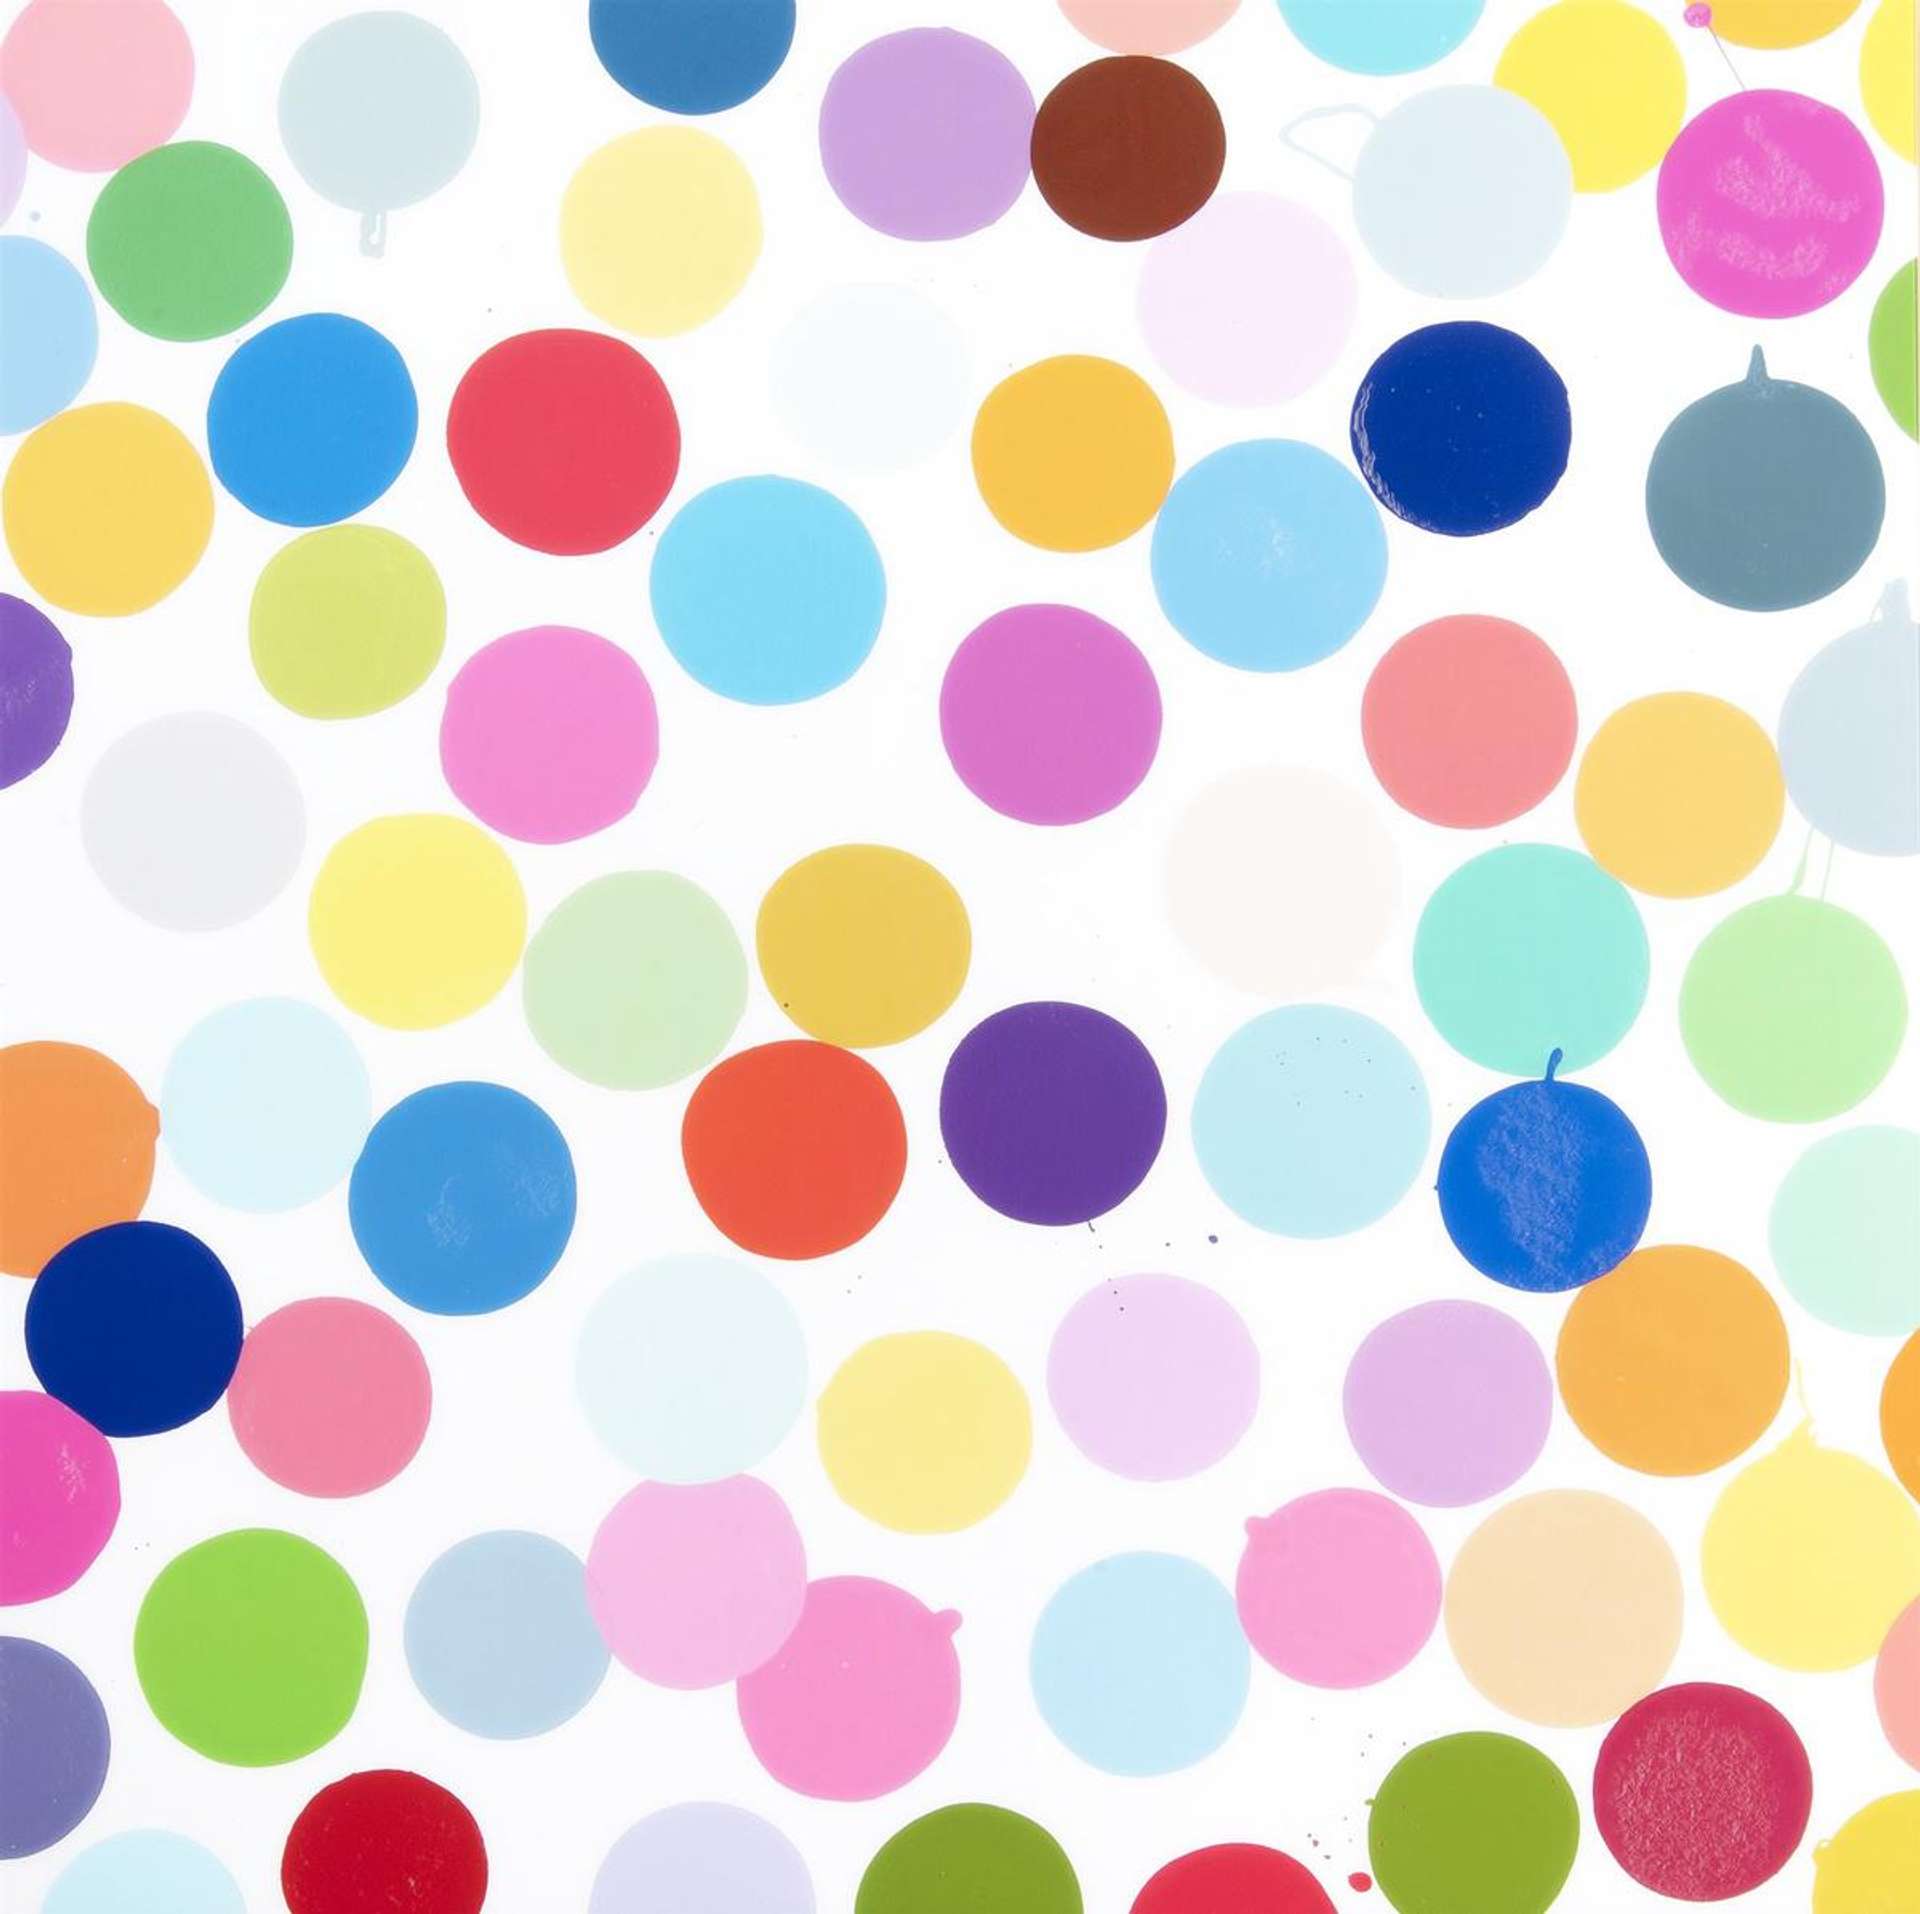 An image of one of Damien Hirst's spot paintings, consisting of several randomly arranged colourful dots against a white background.